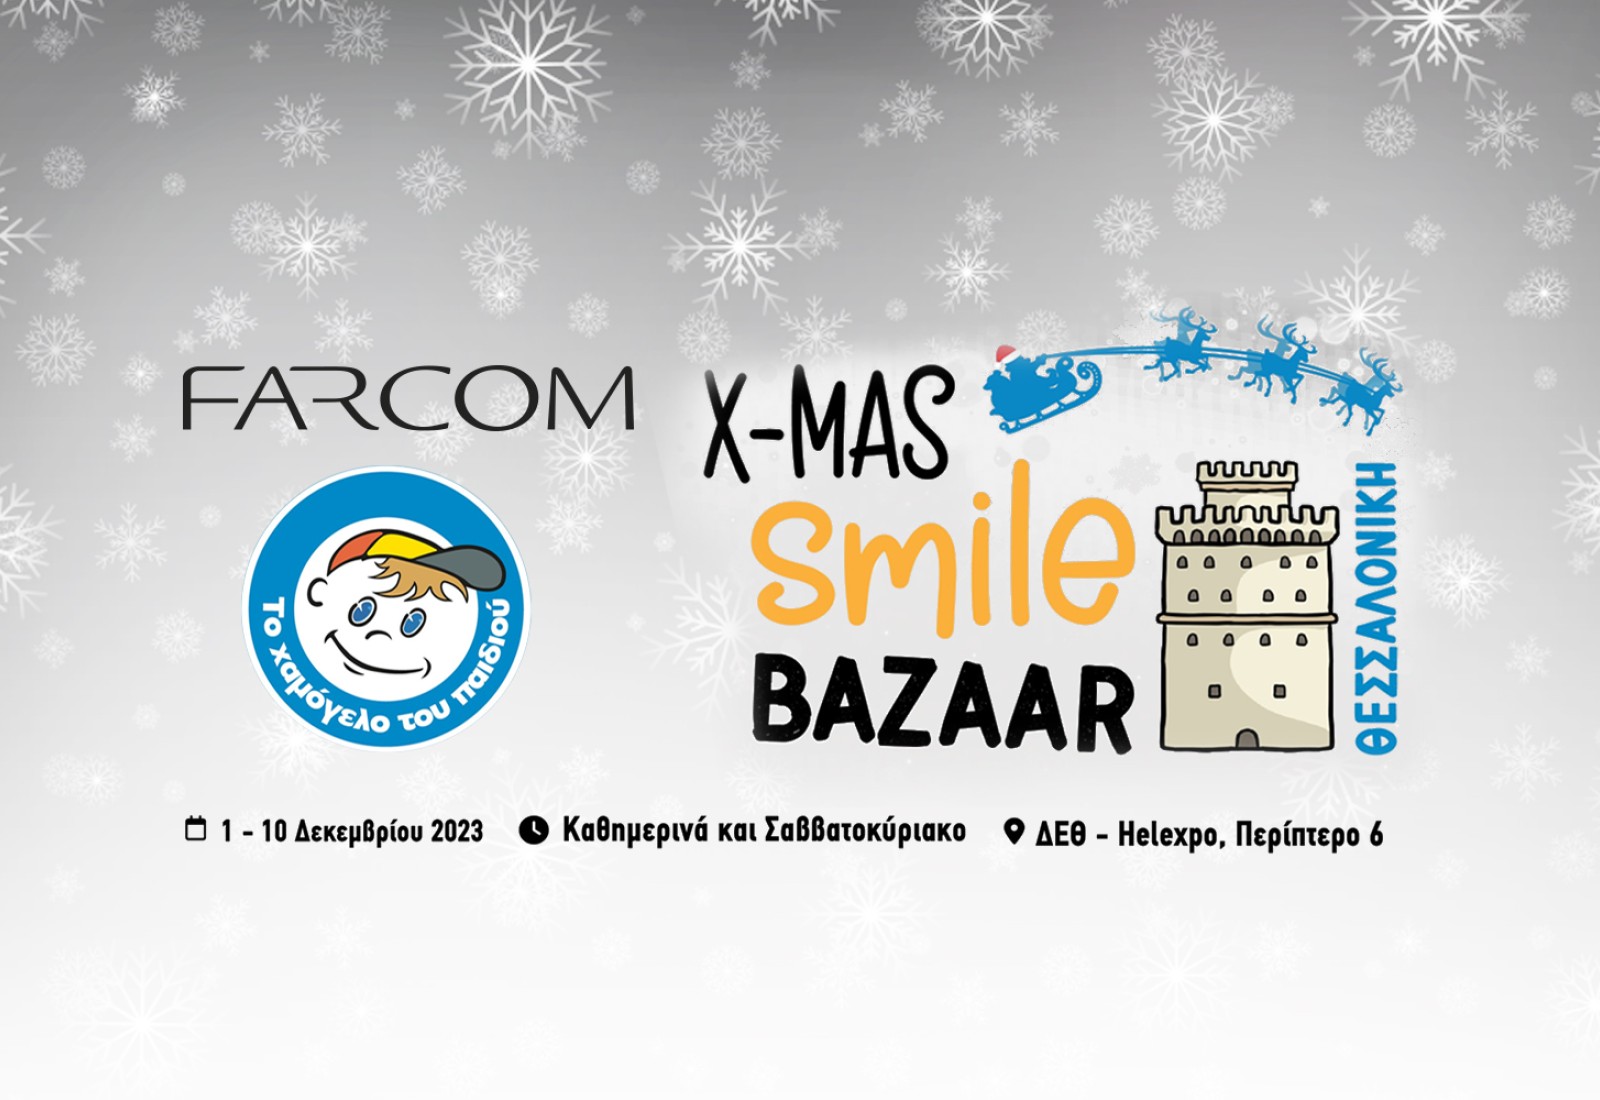 FARCOM participates in the 1st Christmas Smile Bazaar of Thessaloniki organized by The Smile of the Child